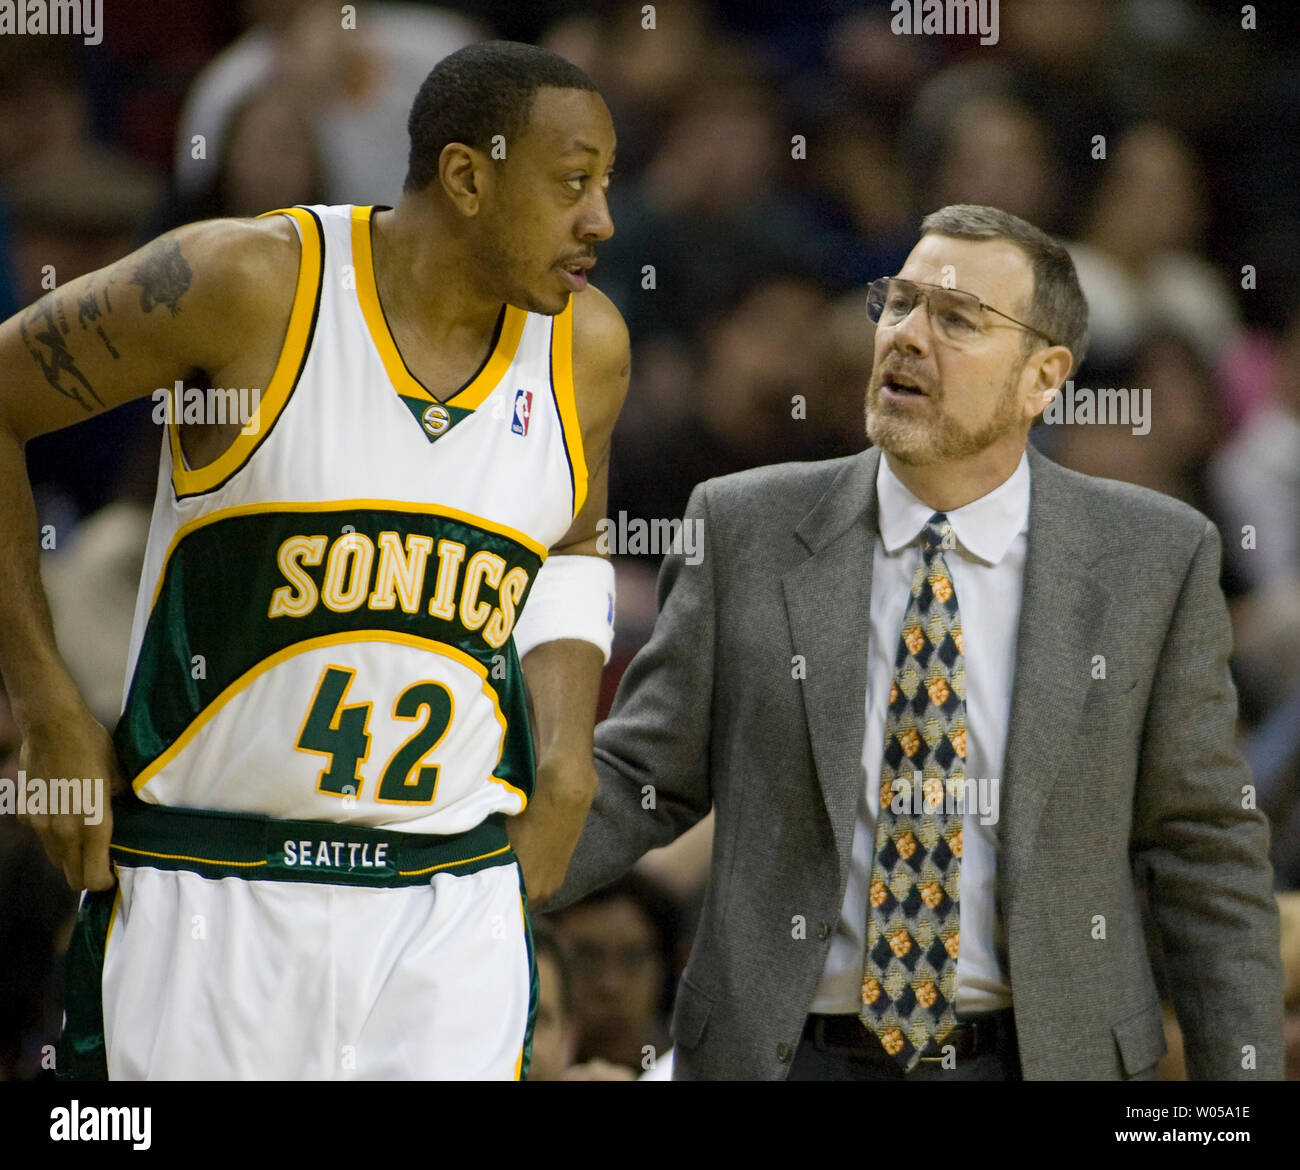 Seattle SuperSonics' head coach P.J. Carlesimo (R) talks to Donyell Marshall as he gets ready to go onto the court during the second half at the Key Arena in Seattle on March 30, 2008. The Kings beat the SuperSonics 120-107.  (UPI Photo/Jim Bryant) Stock Photo